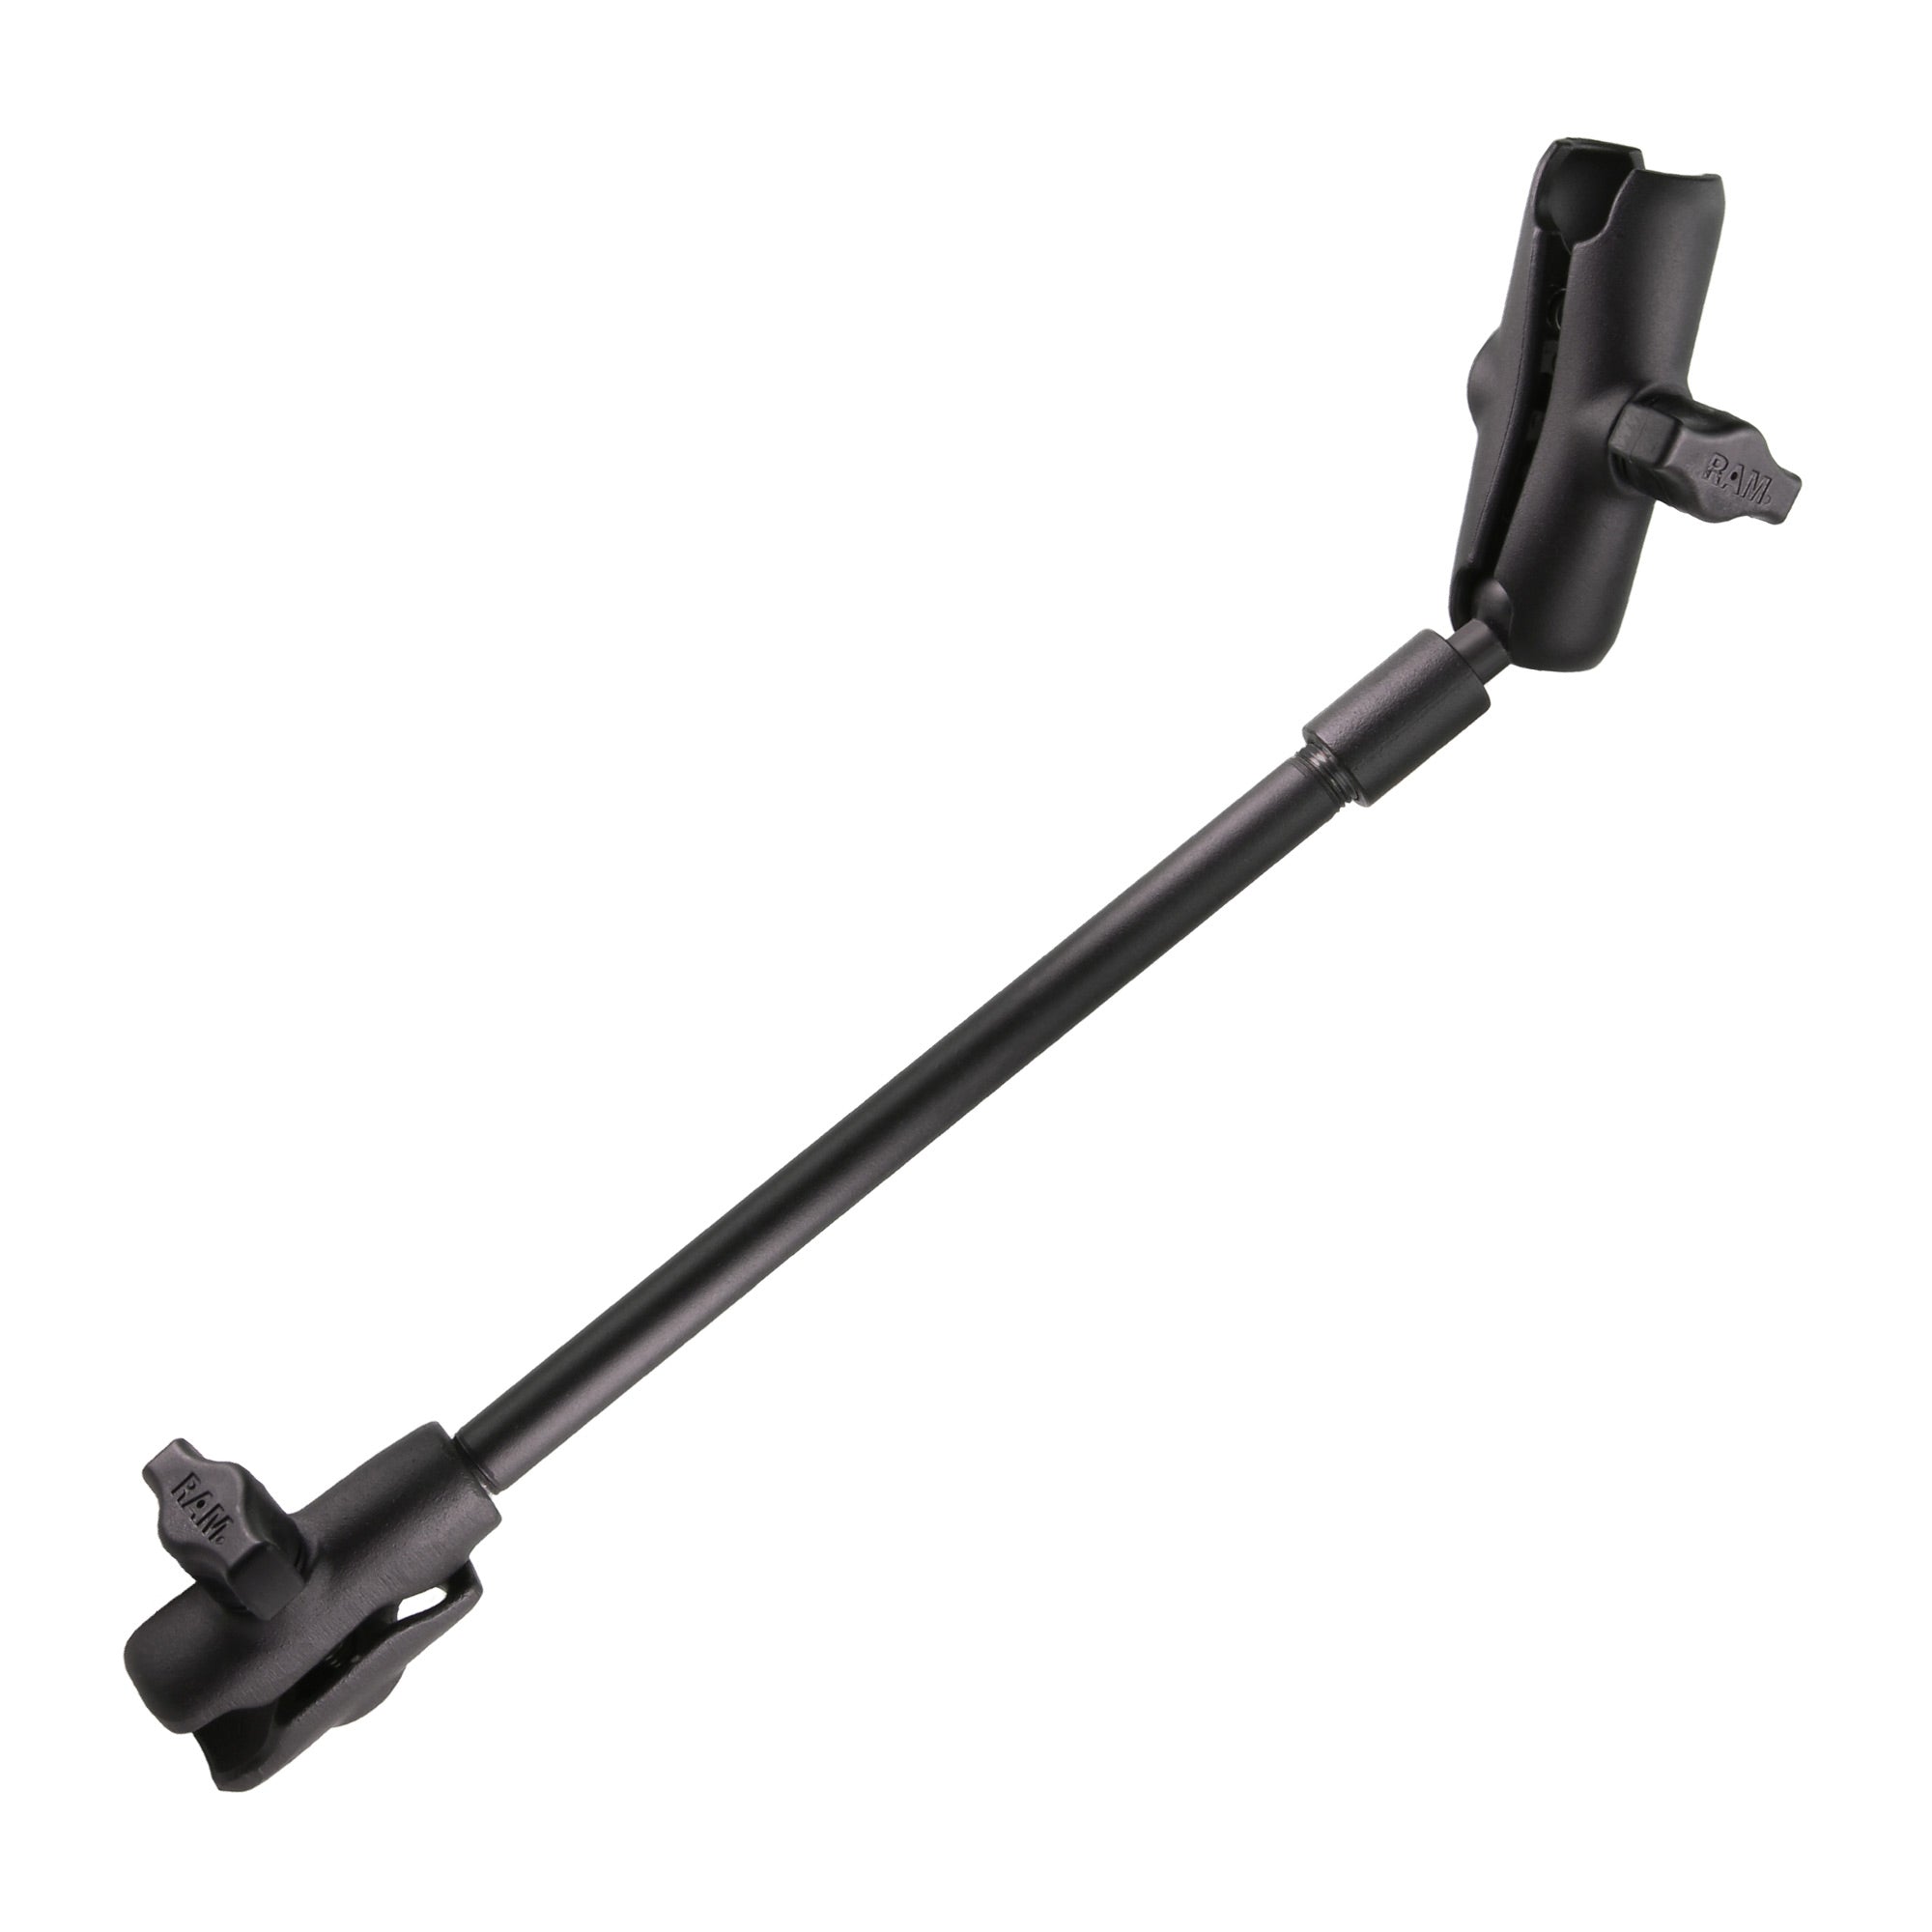 RAM Pipe & Socket 16inch Extension Arm for Wheelchairs - B-Size